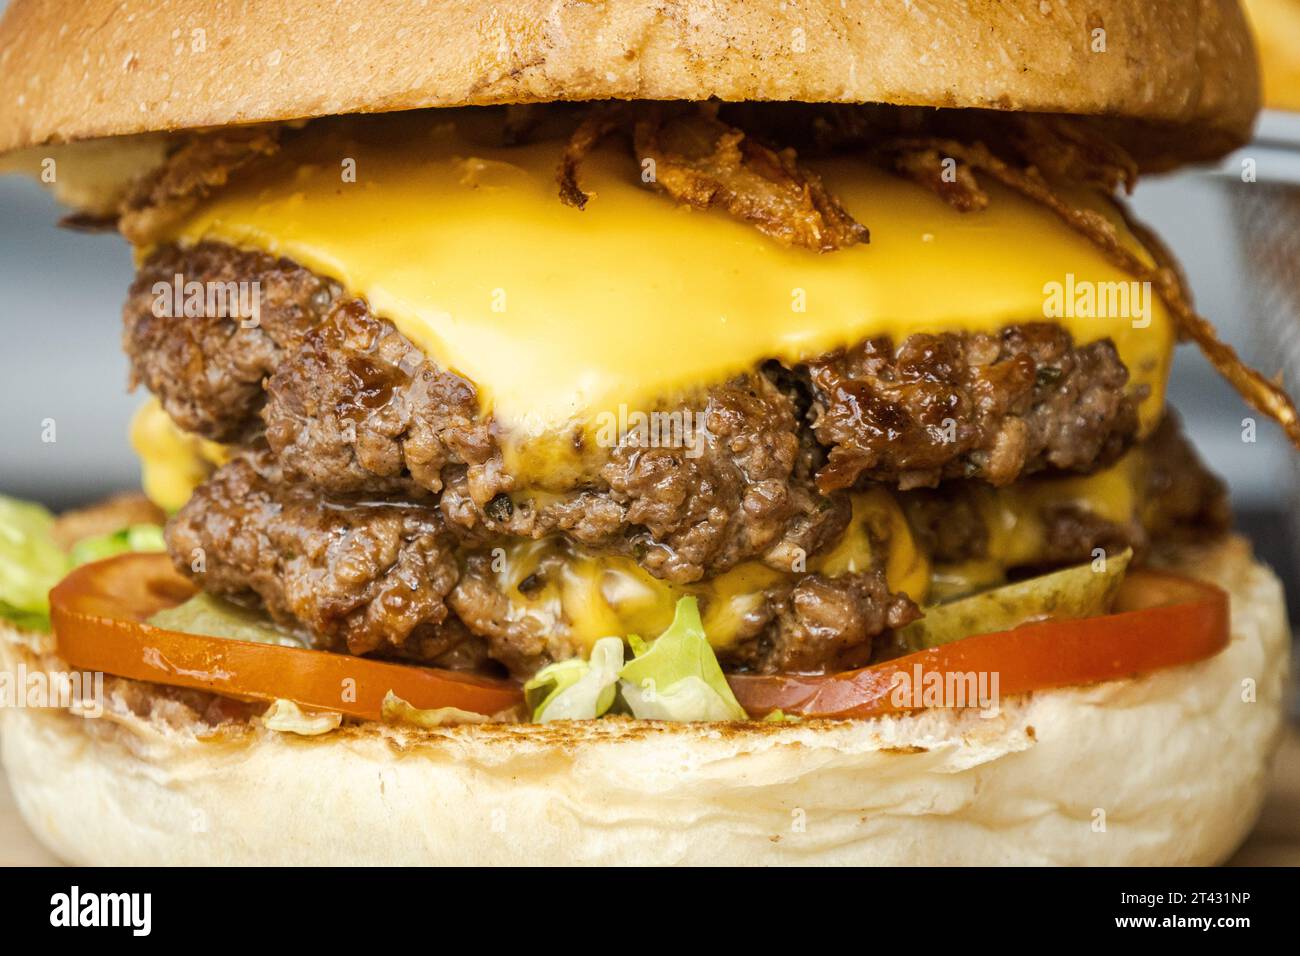 Close-up Full frame close-up of a double cheeseburger Stock Photo